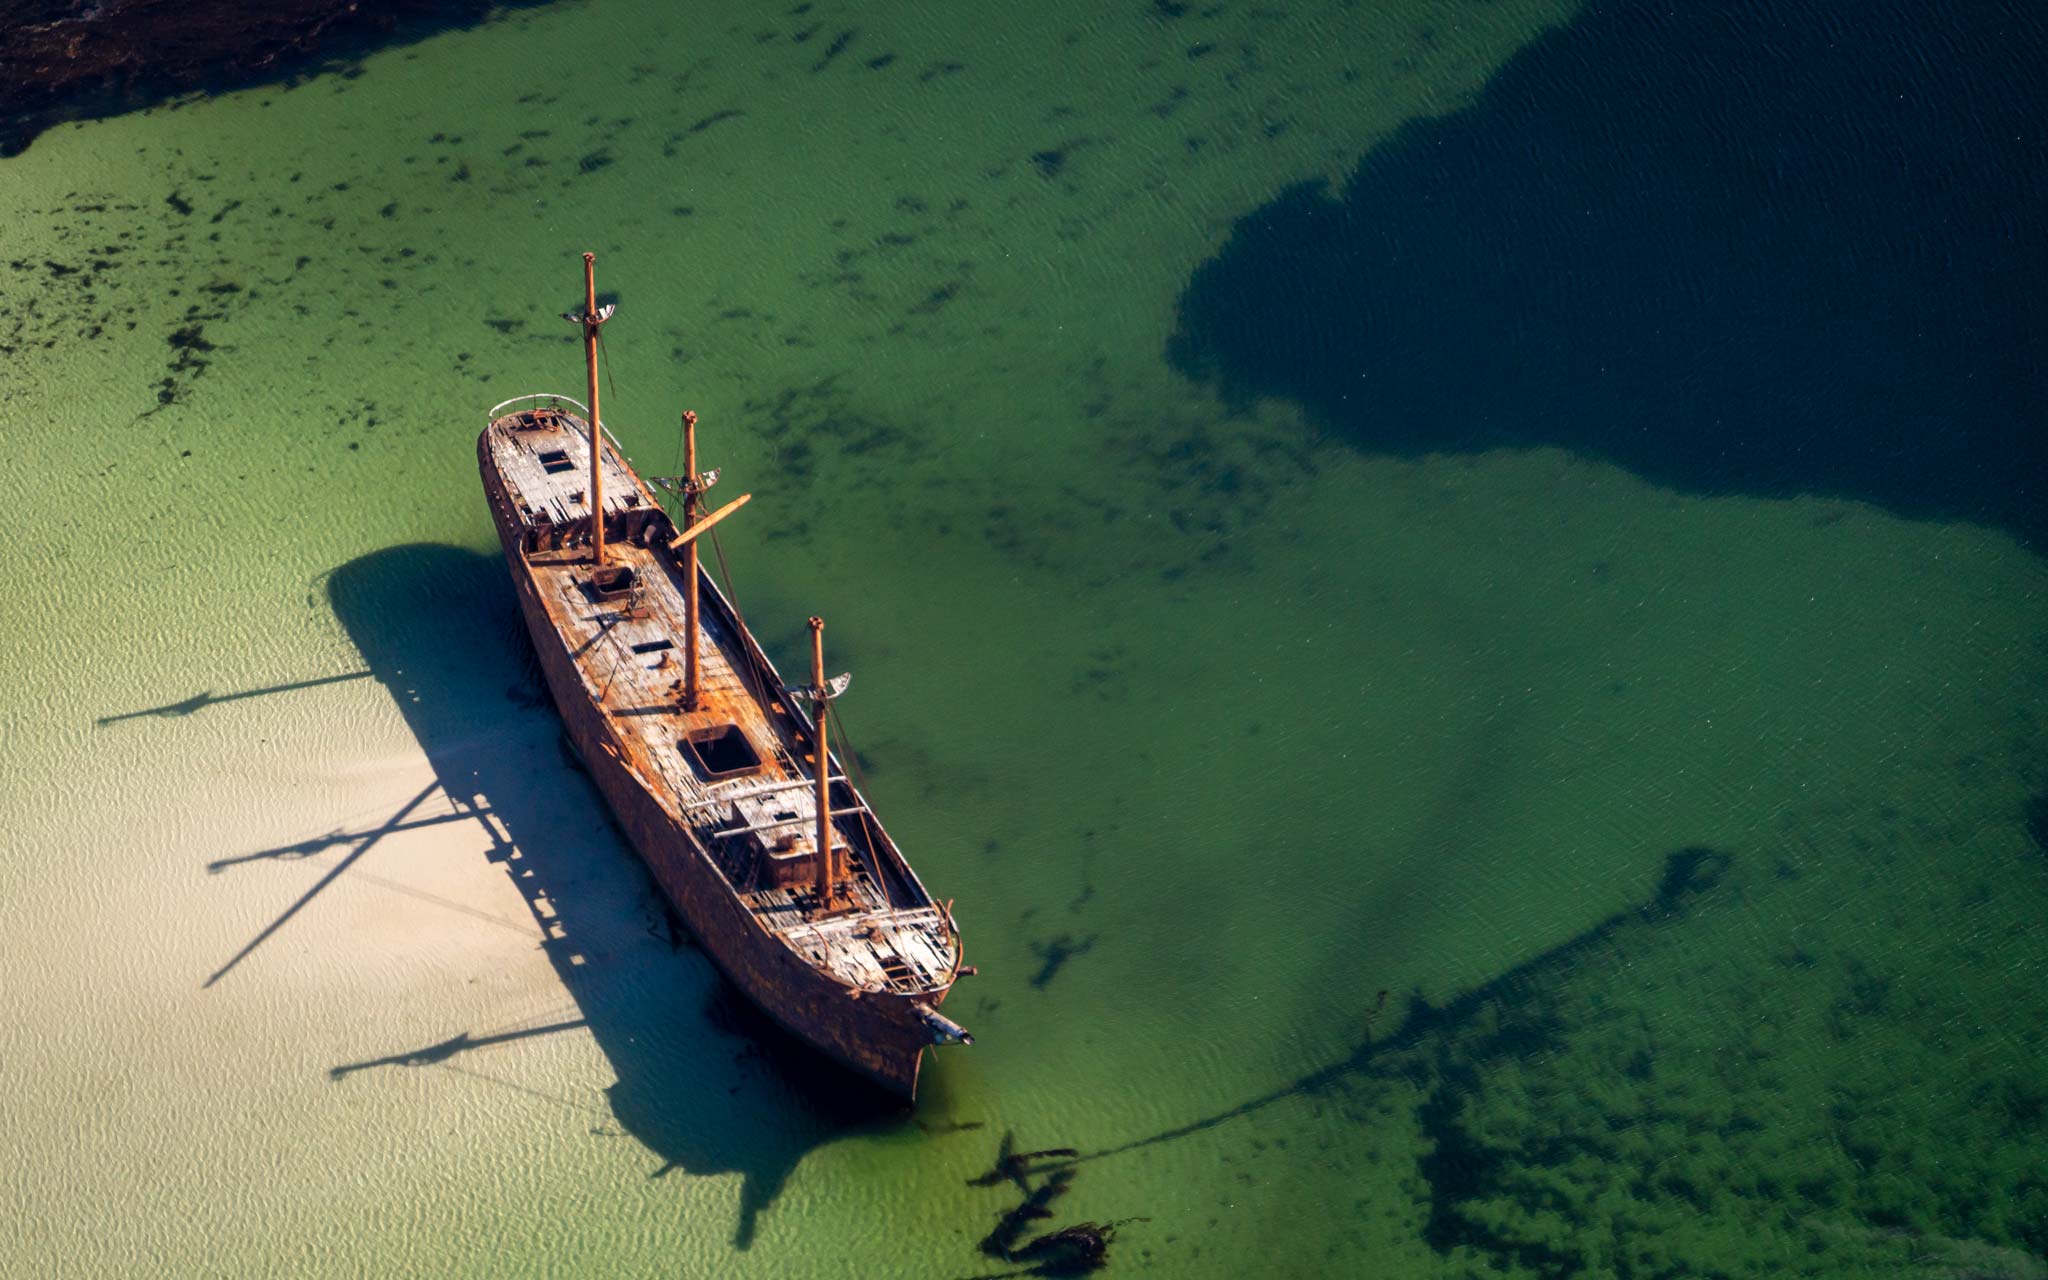 Lady Elizabeth Shipwreck as seen from a helicopter